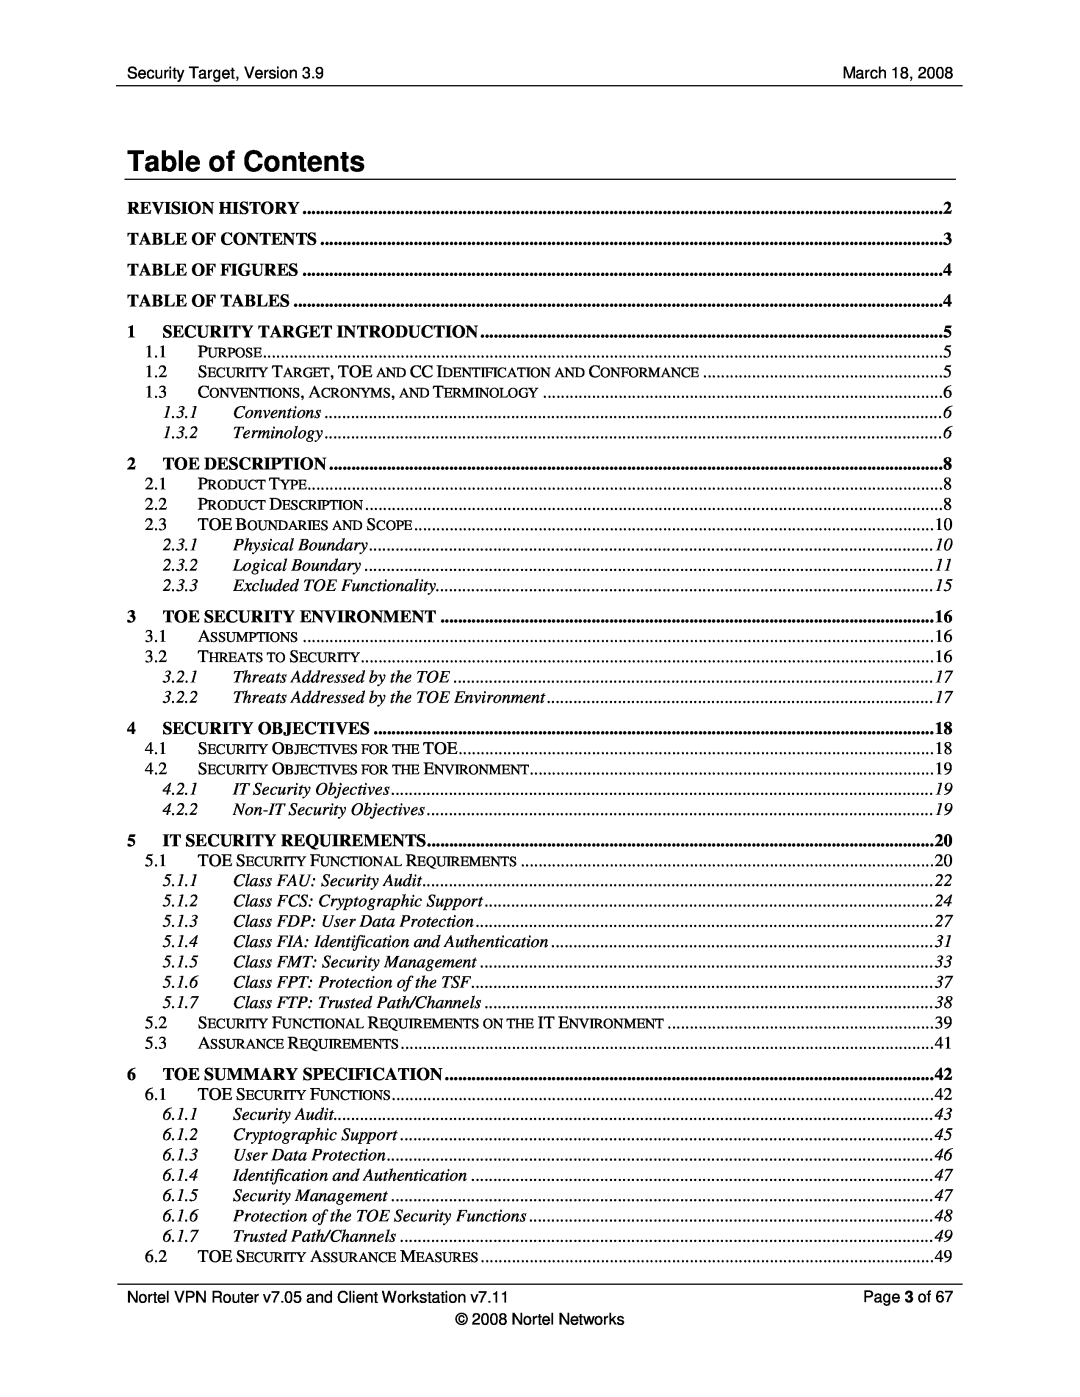 Nortel Networks 7.11, 7.05 manual Table of Contents, Revision History, Table Of Contents, Table Of Figures, Table Of Tables 